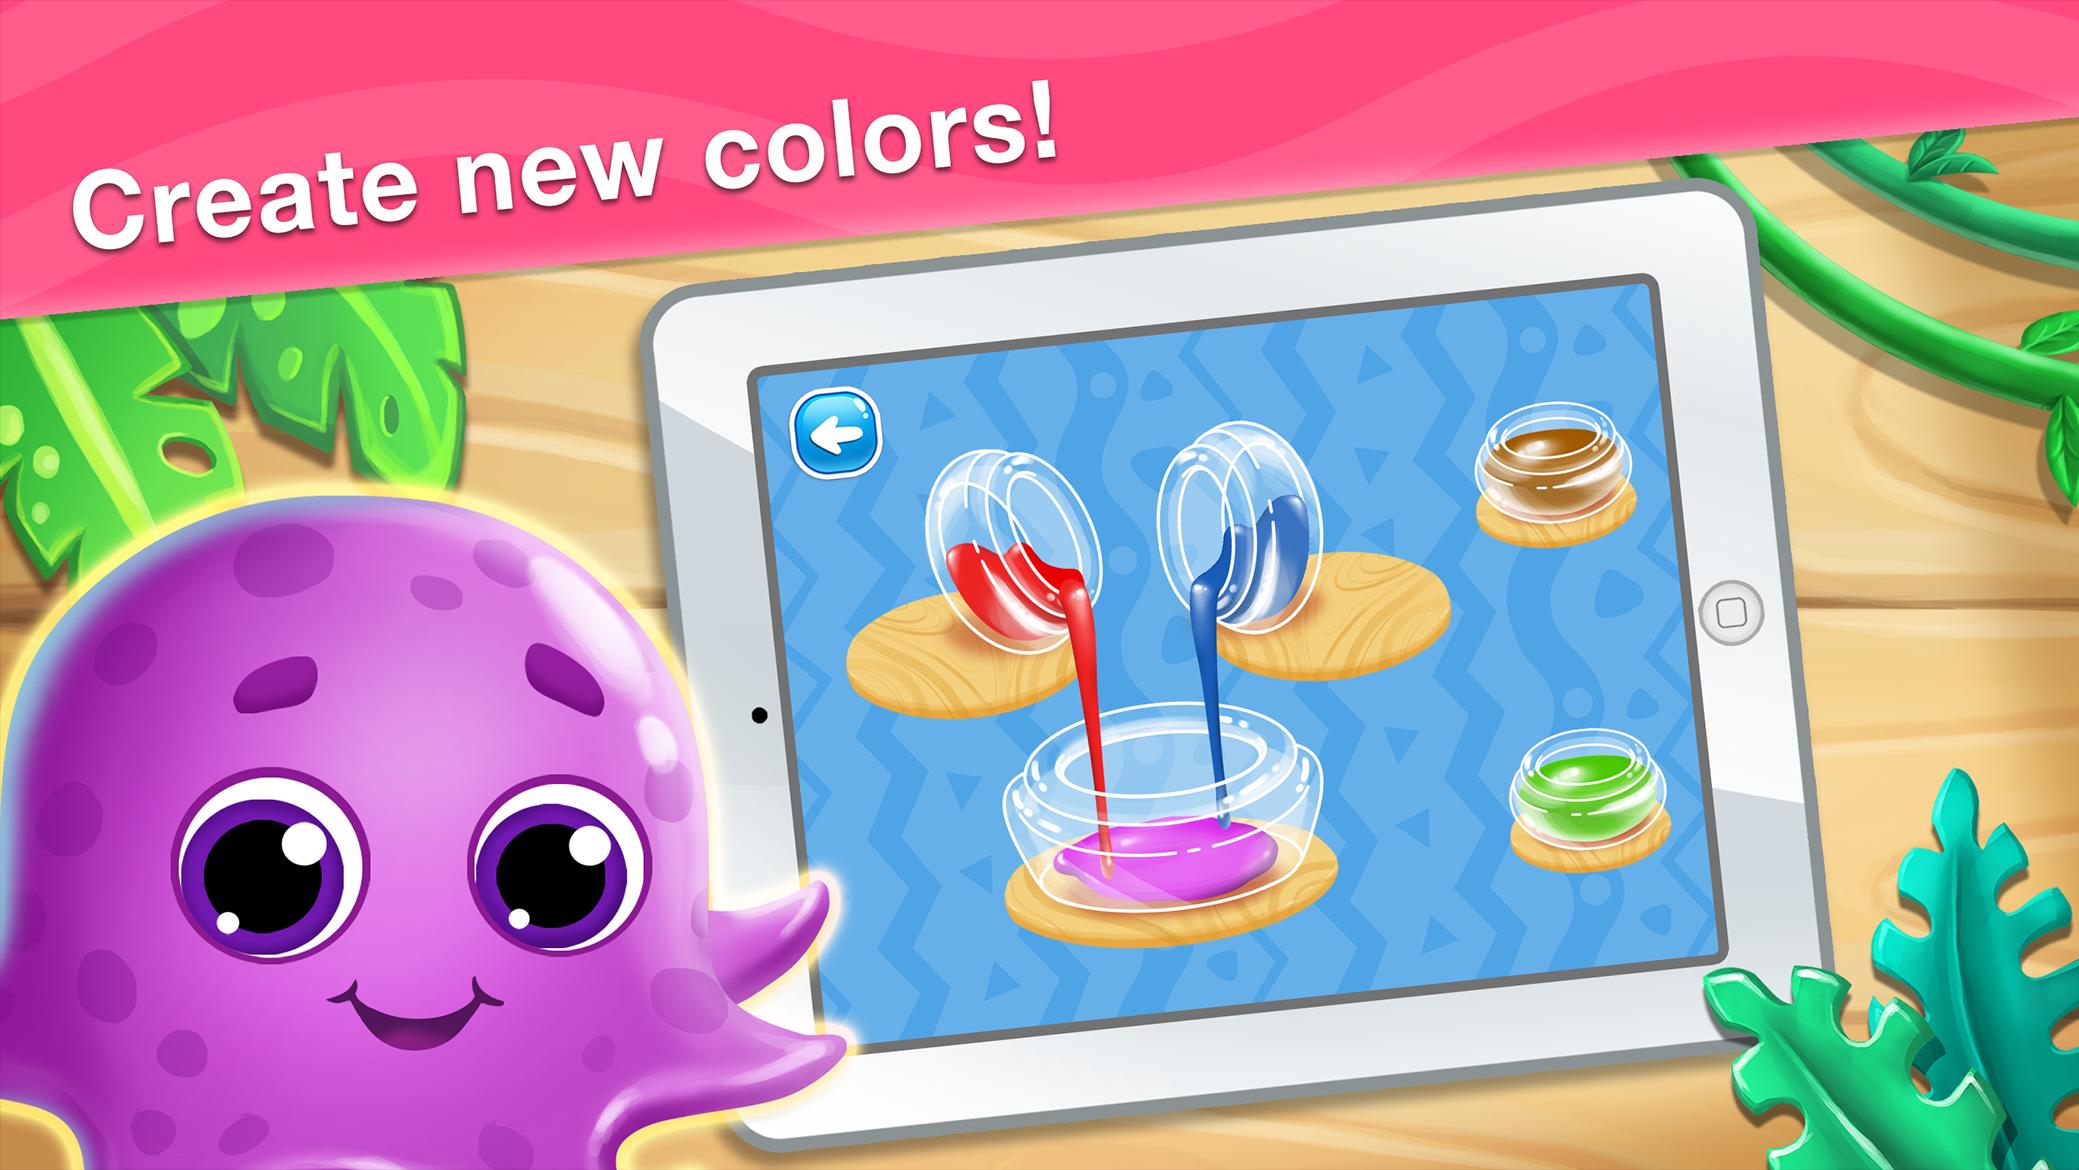 Colors learning games for kids